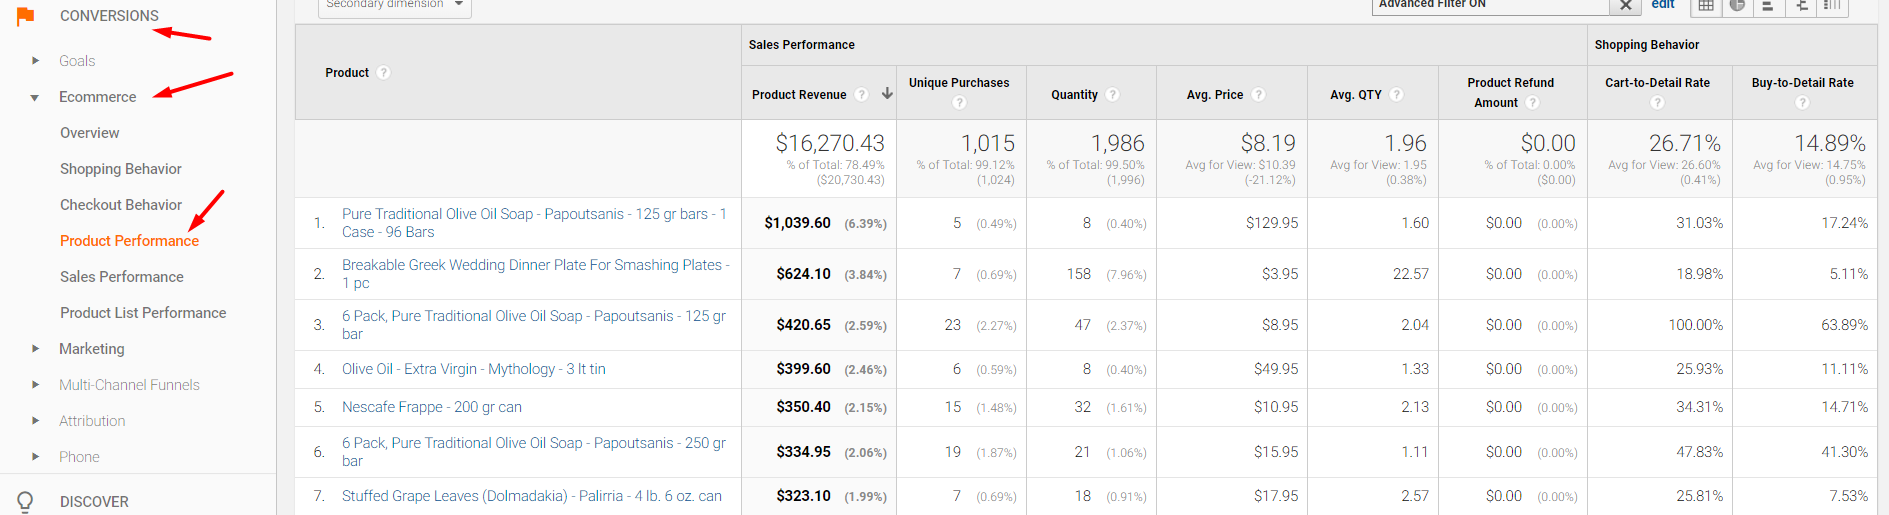 To report sales by product, go to emConversions gt; Ecommerce gt; Product Performance/em.